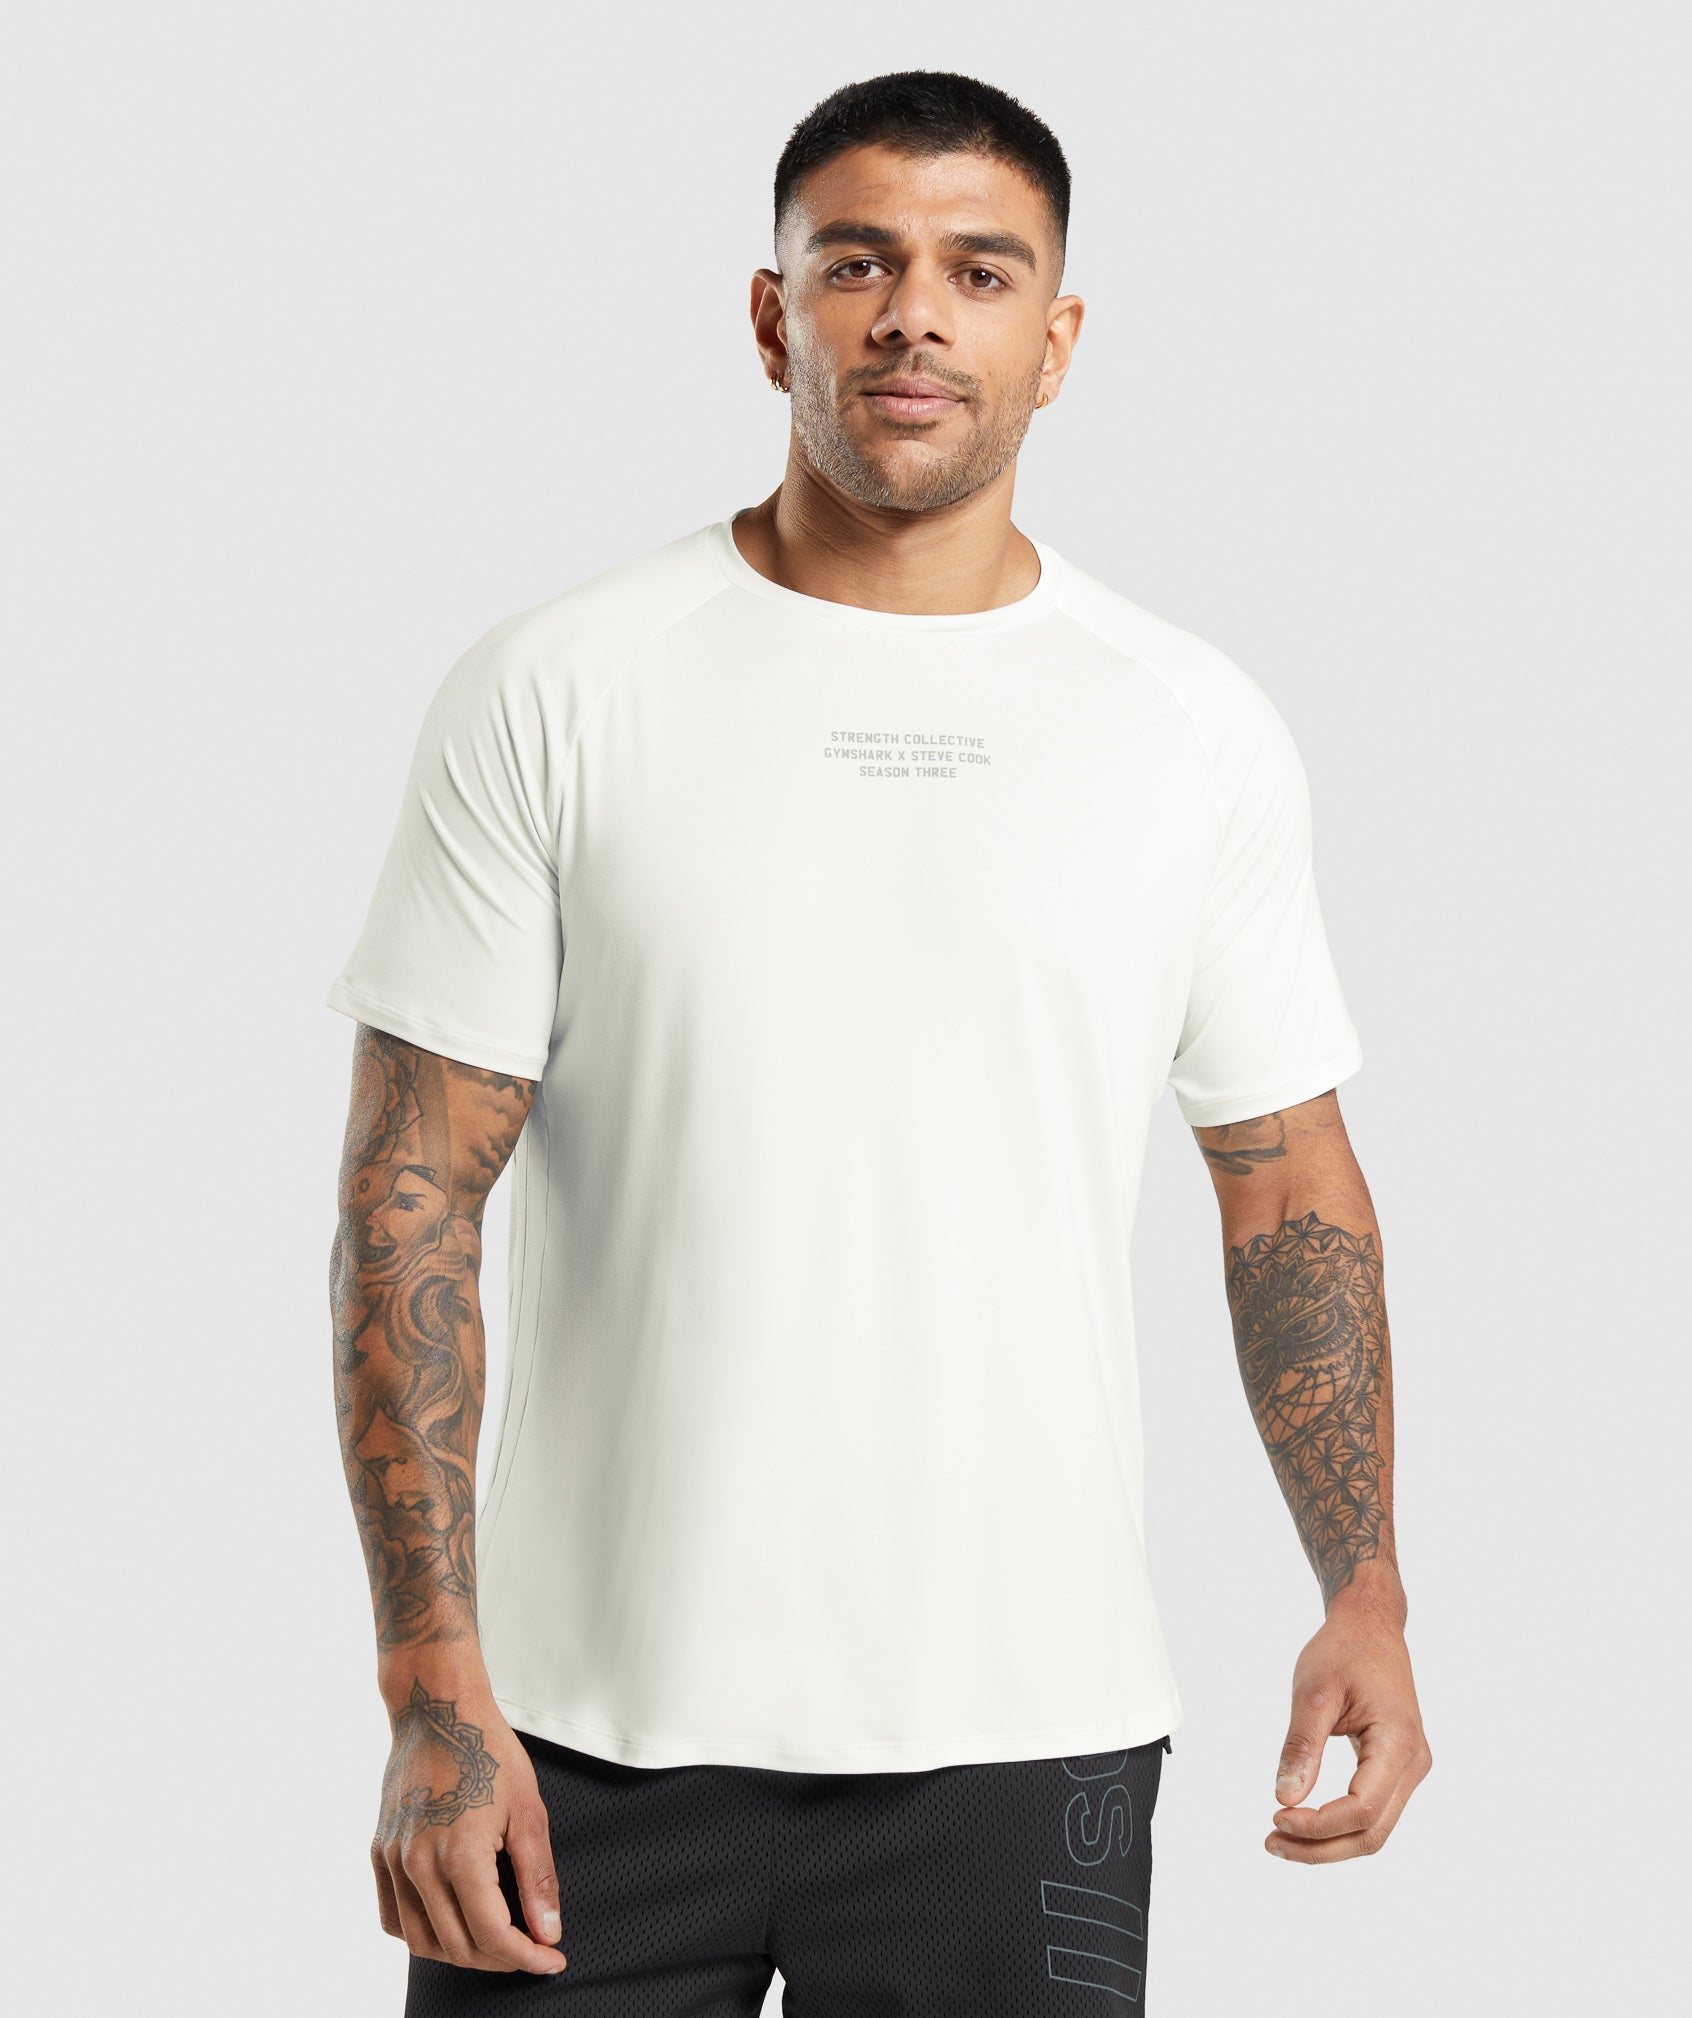 Gymshark//Steve Cook T-Shirt in Off White - view 1